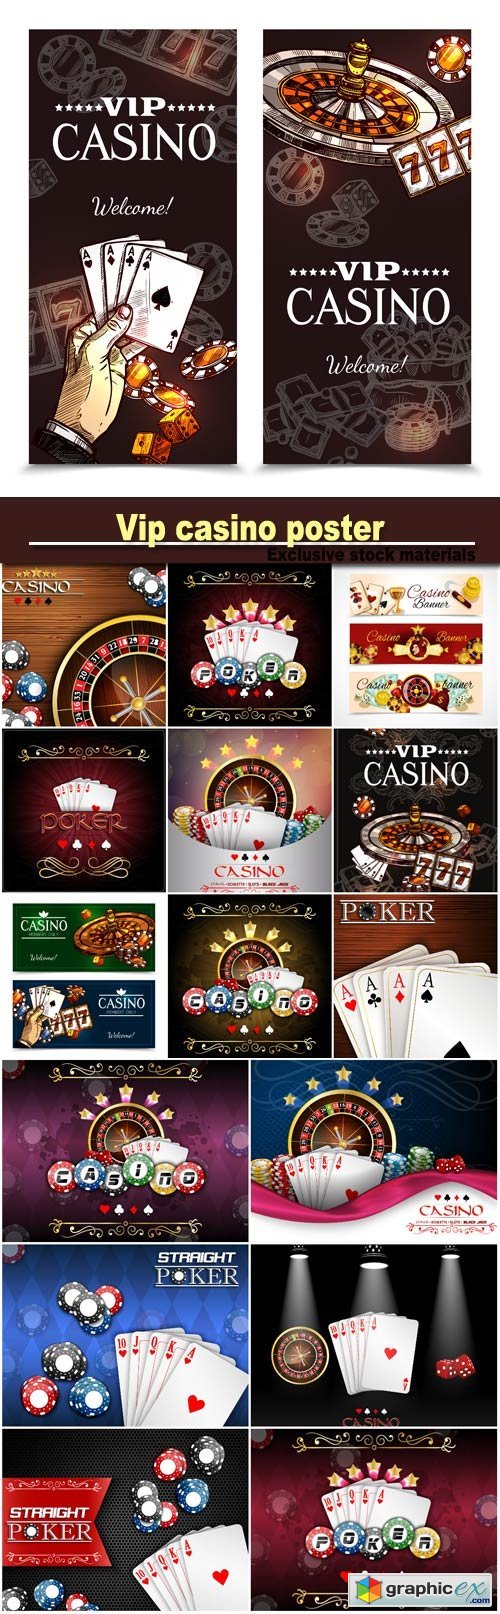 Vip casino poster with roulette wheel cards for poker play chips dice